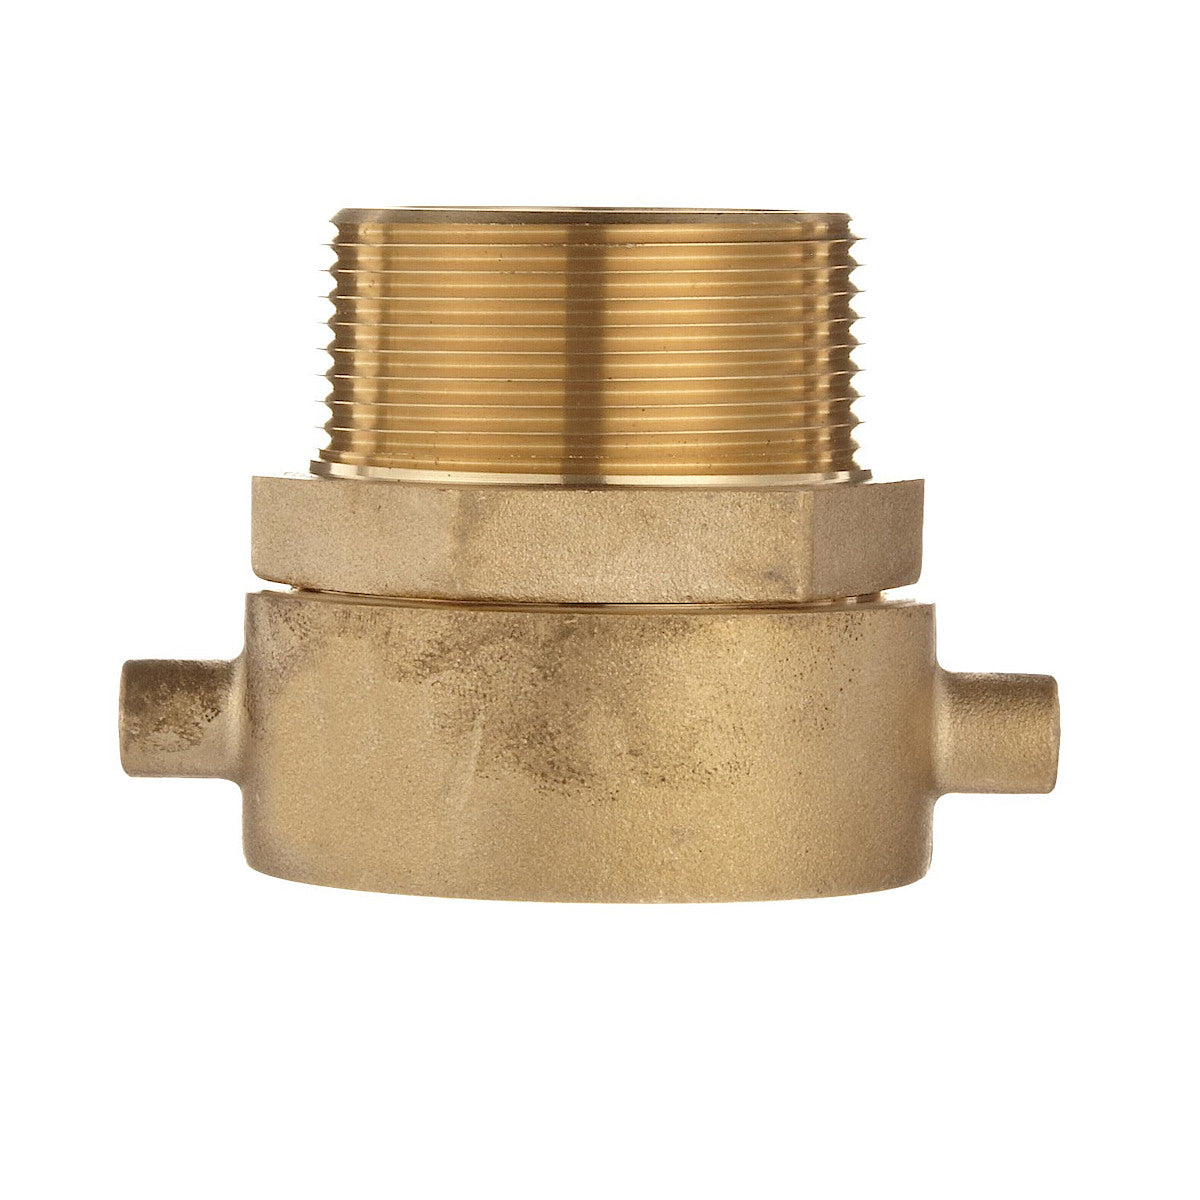 iFCOW 1PC Brass Barbed Reducing Bushing Female Thread Pipe Fitting Connector Adapter 14-25mm